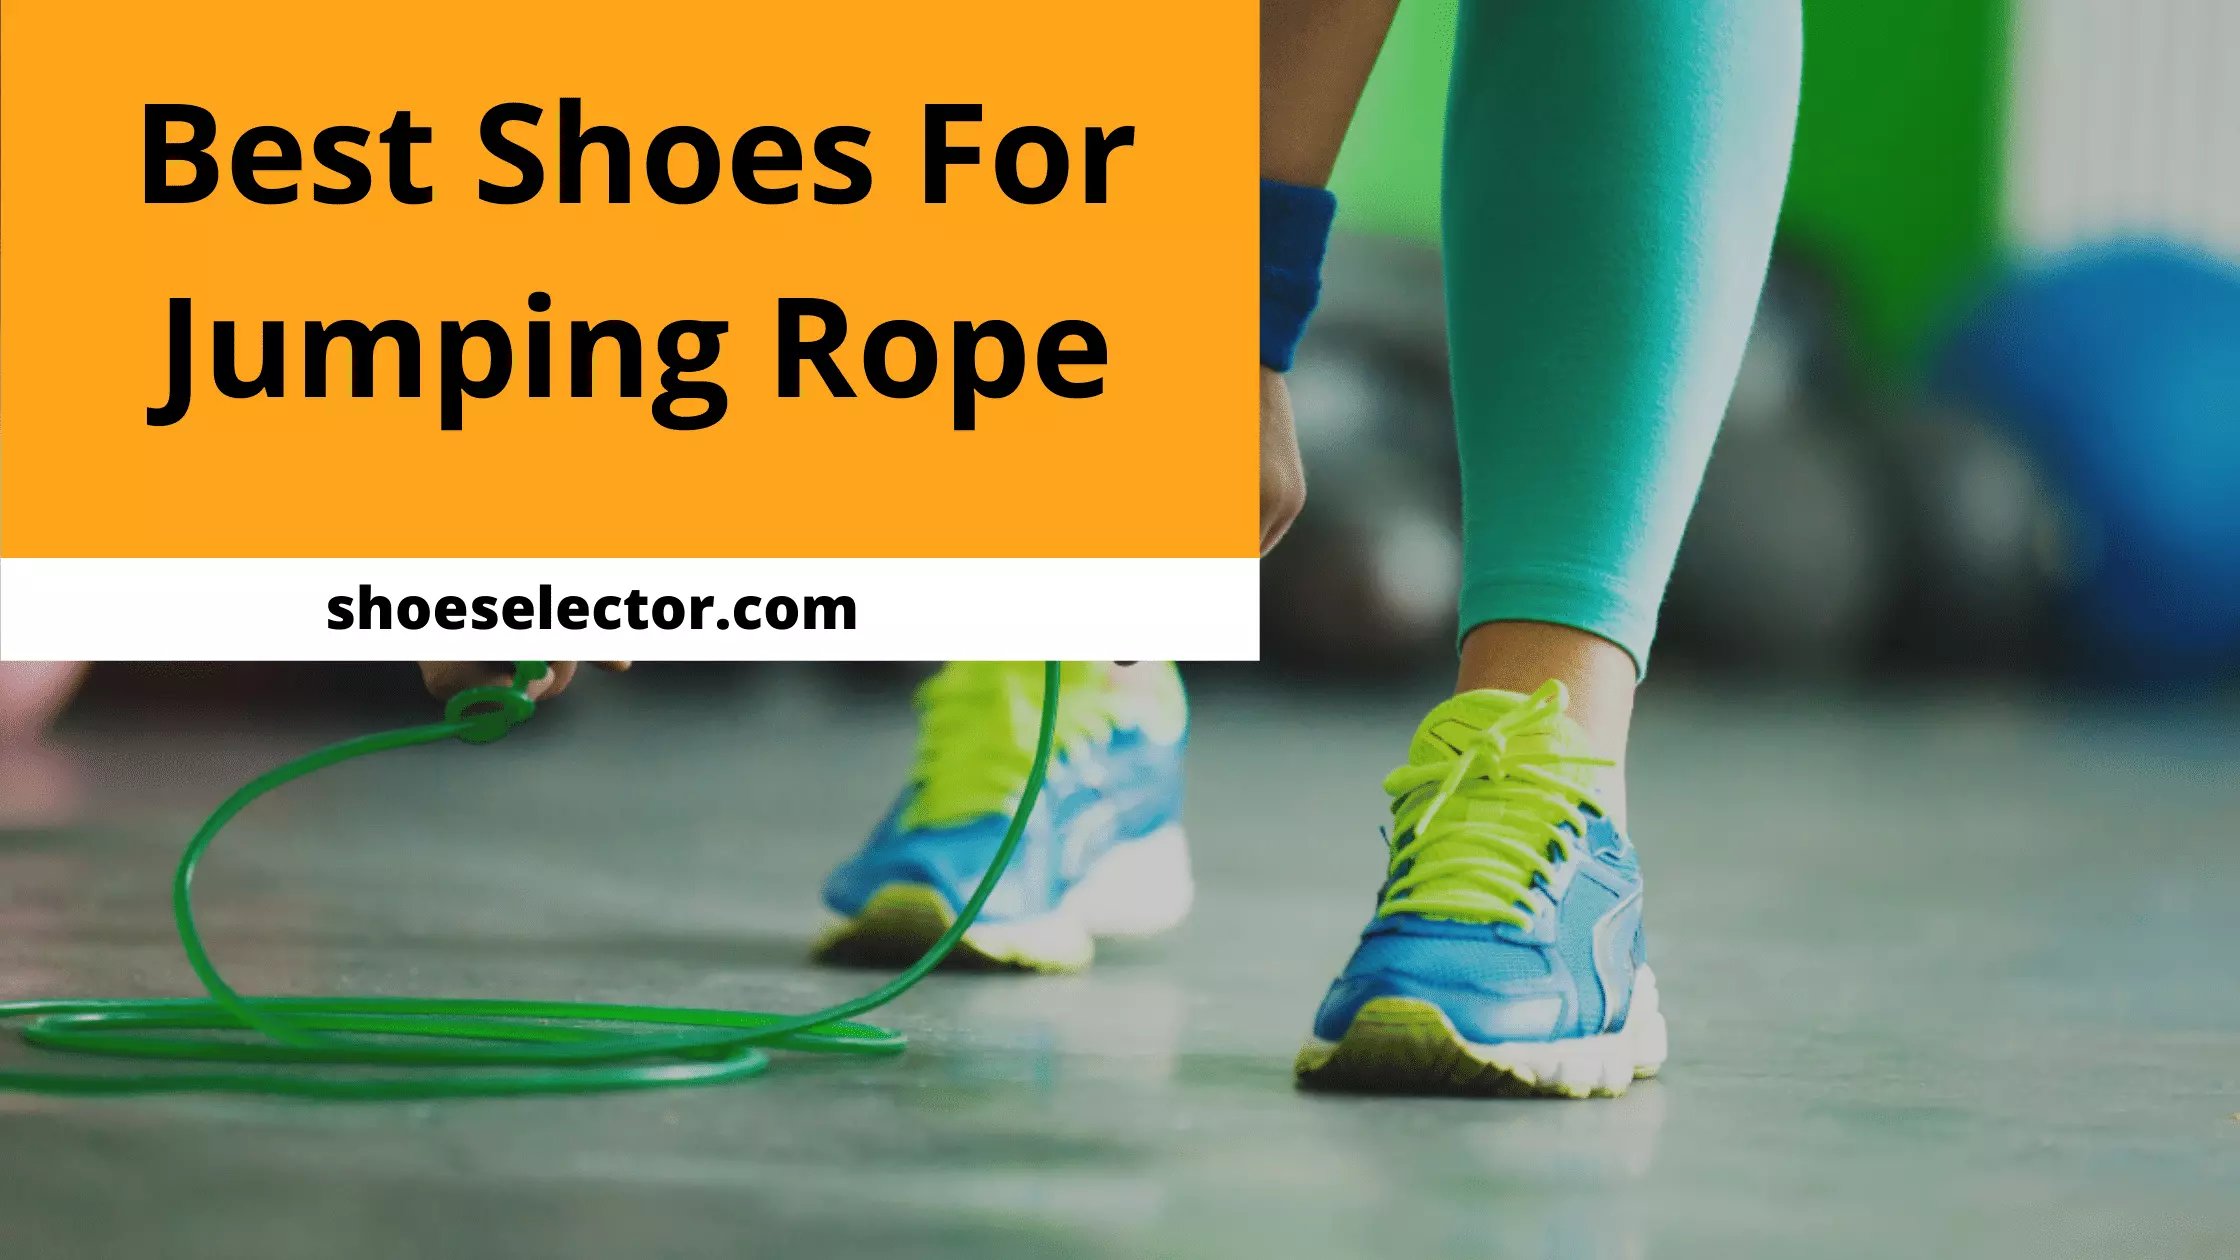 Best Shoes For Jumping Rope With Shopping Tips